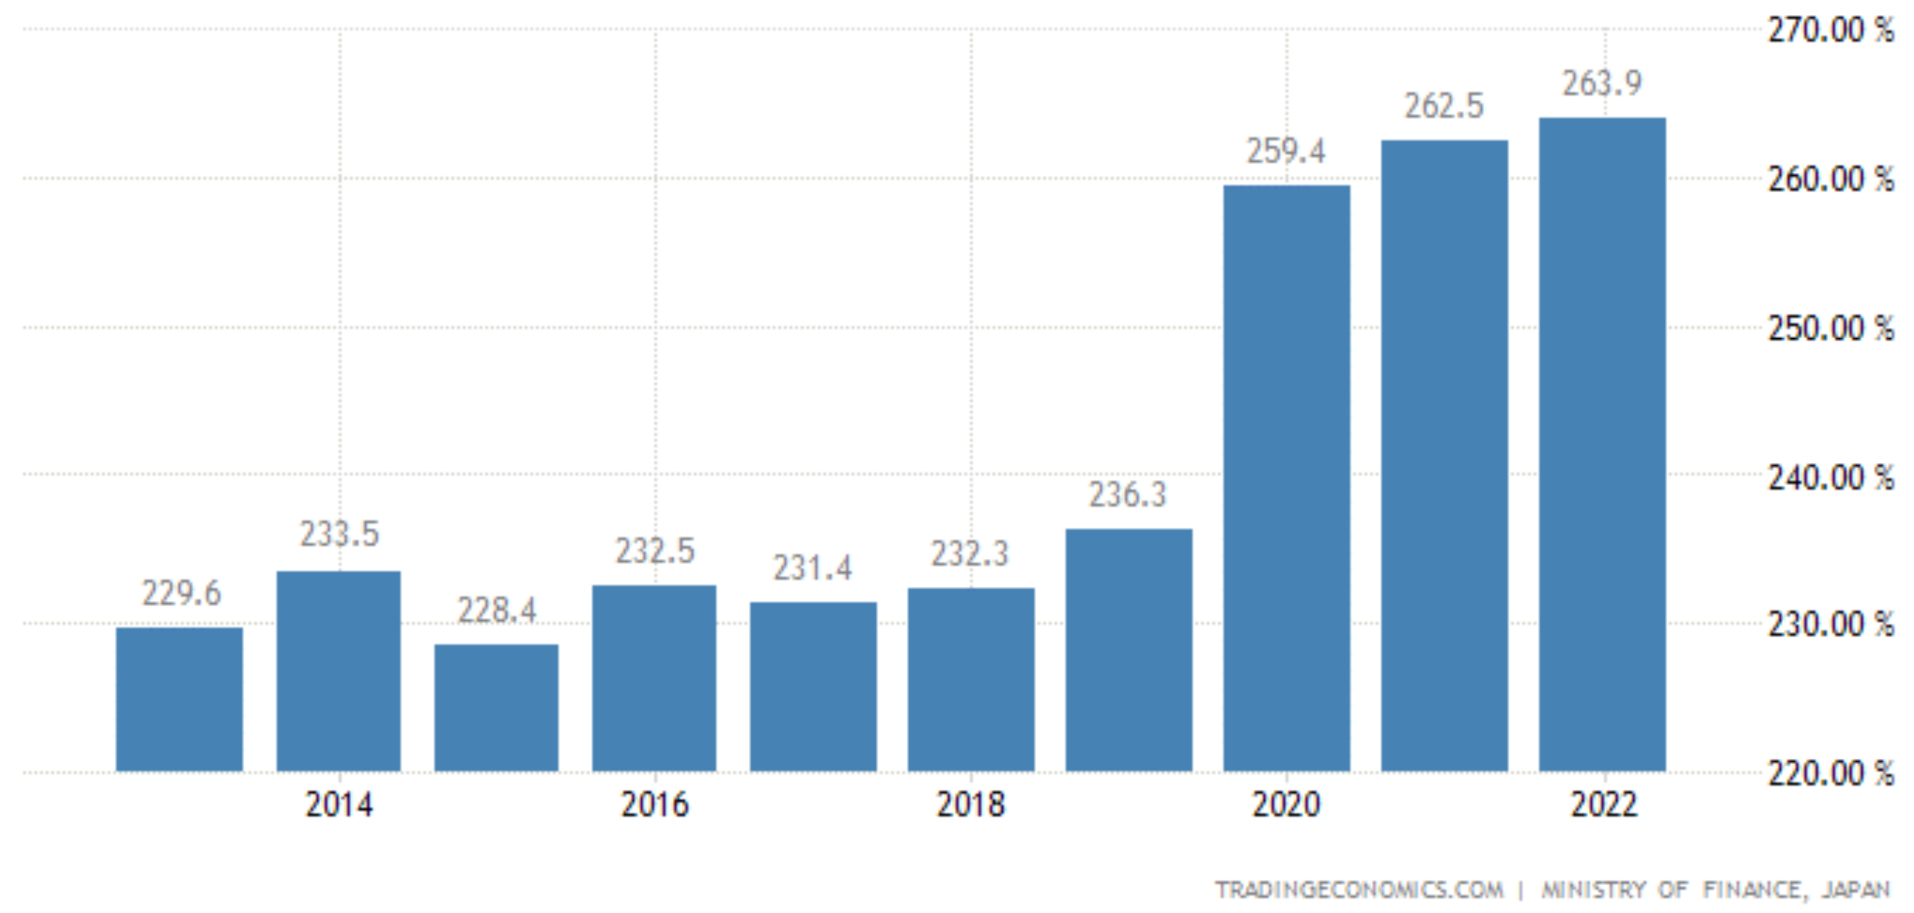 China's Debt to Gross Domestic Product Ratio Bar Chart